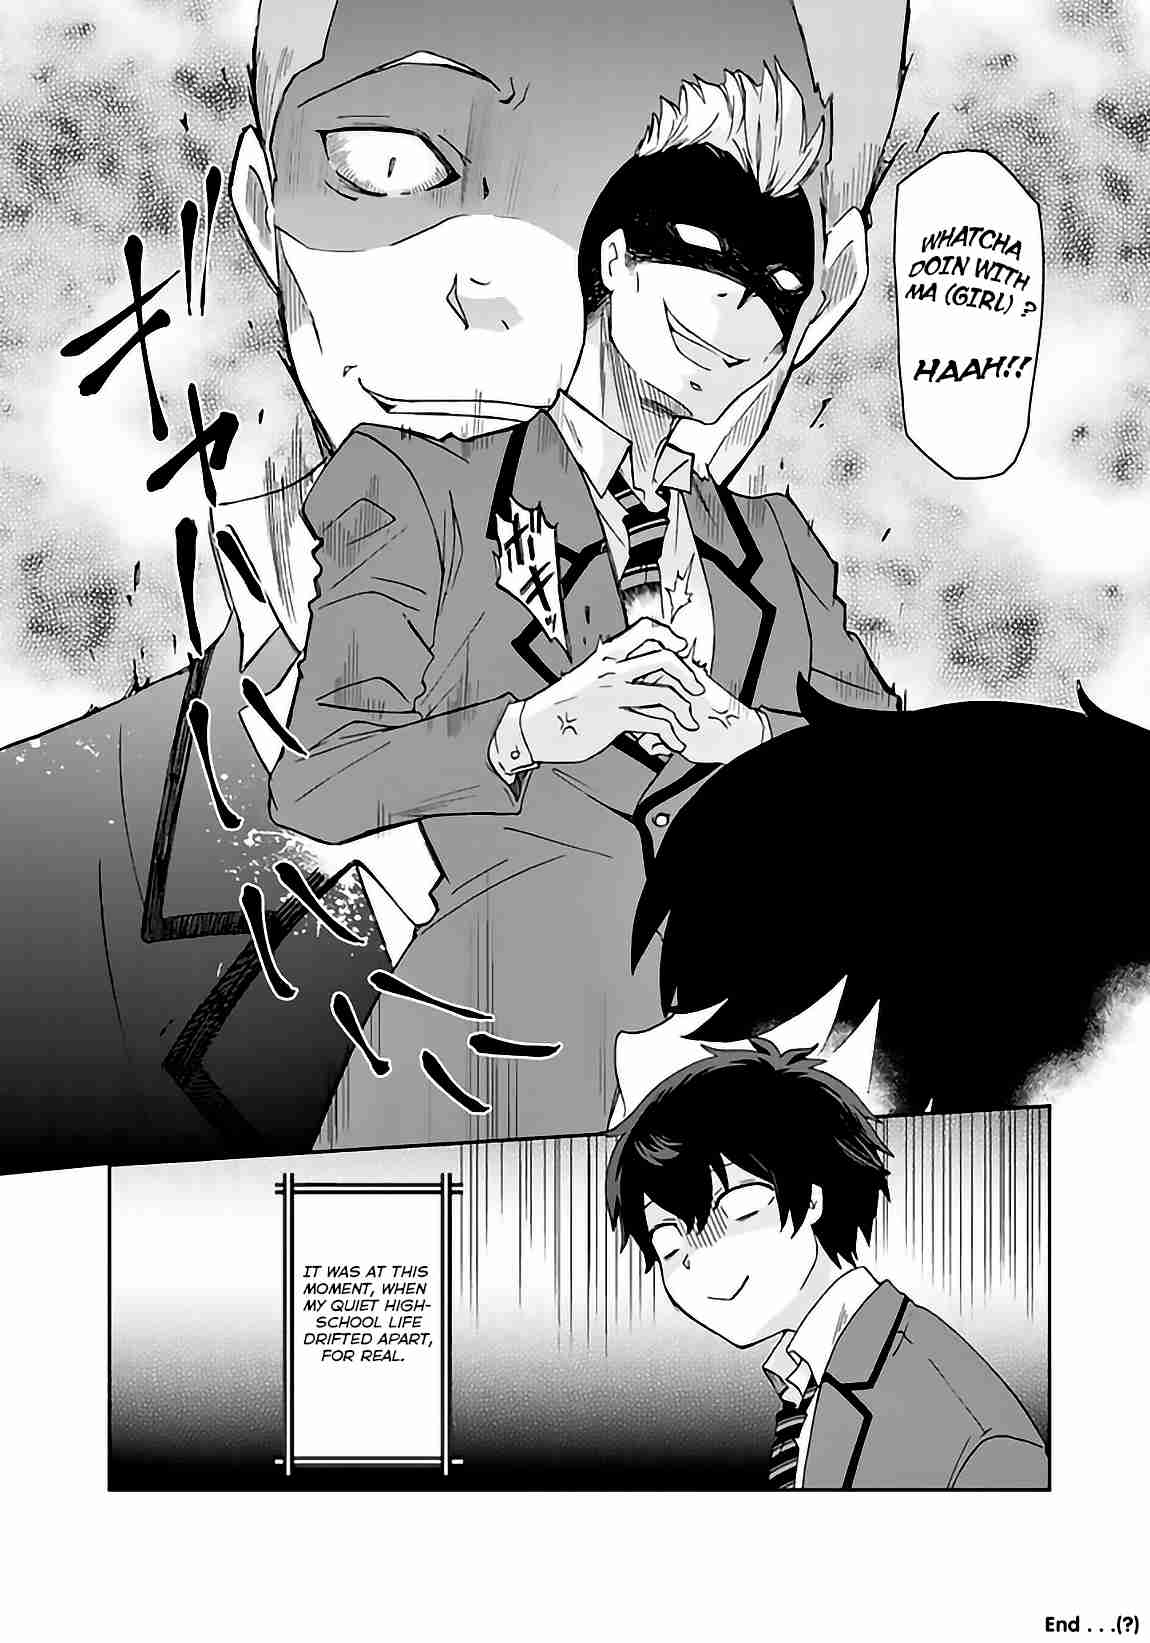 I, who possessed a trash skill 【Thermal Operator】, became unrivaled. Ch. 1.5